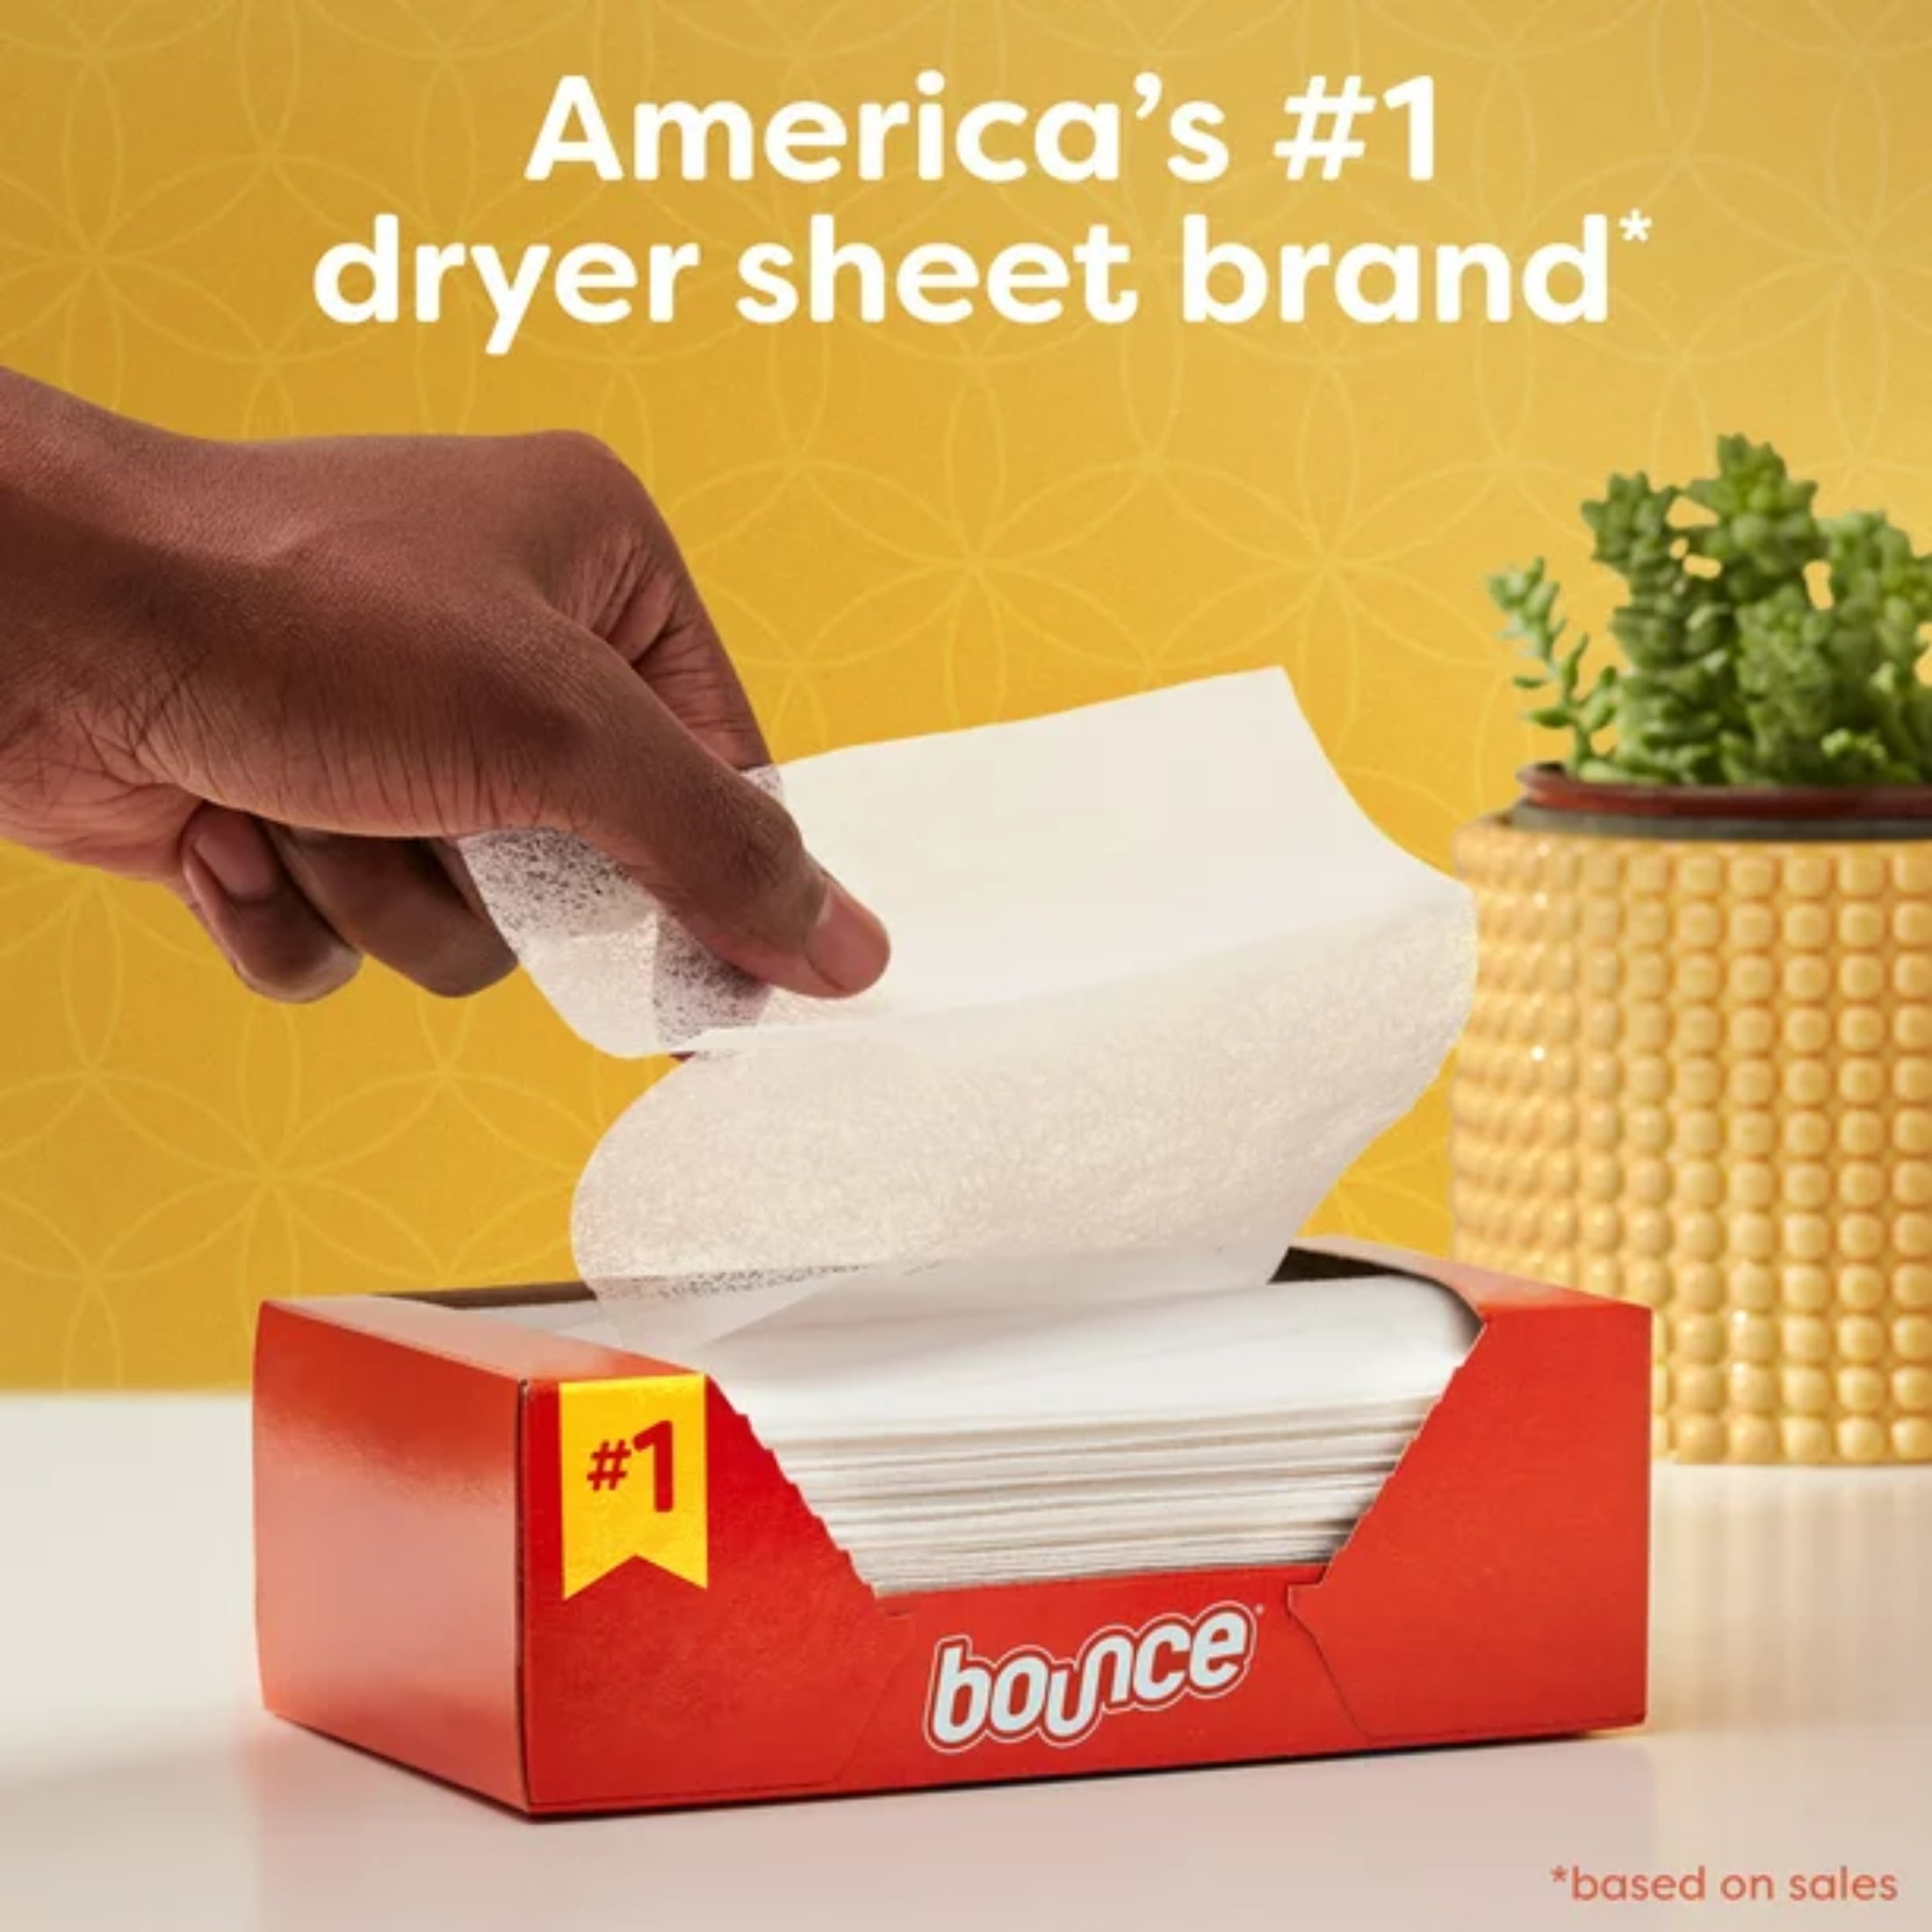 Mixologie Boujee Fabric Softener Dryer Sheets - PREORDER